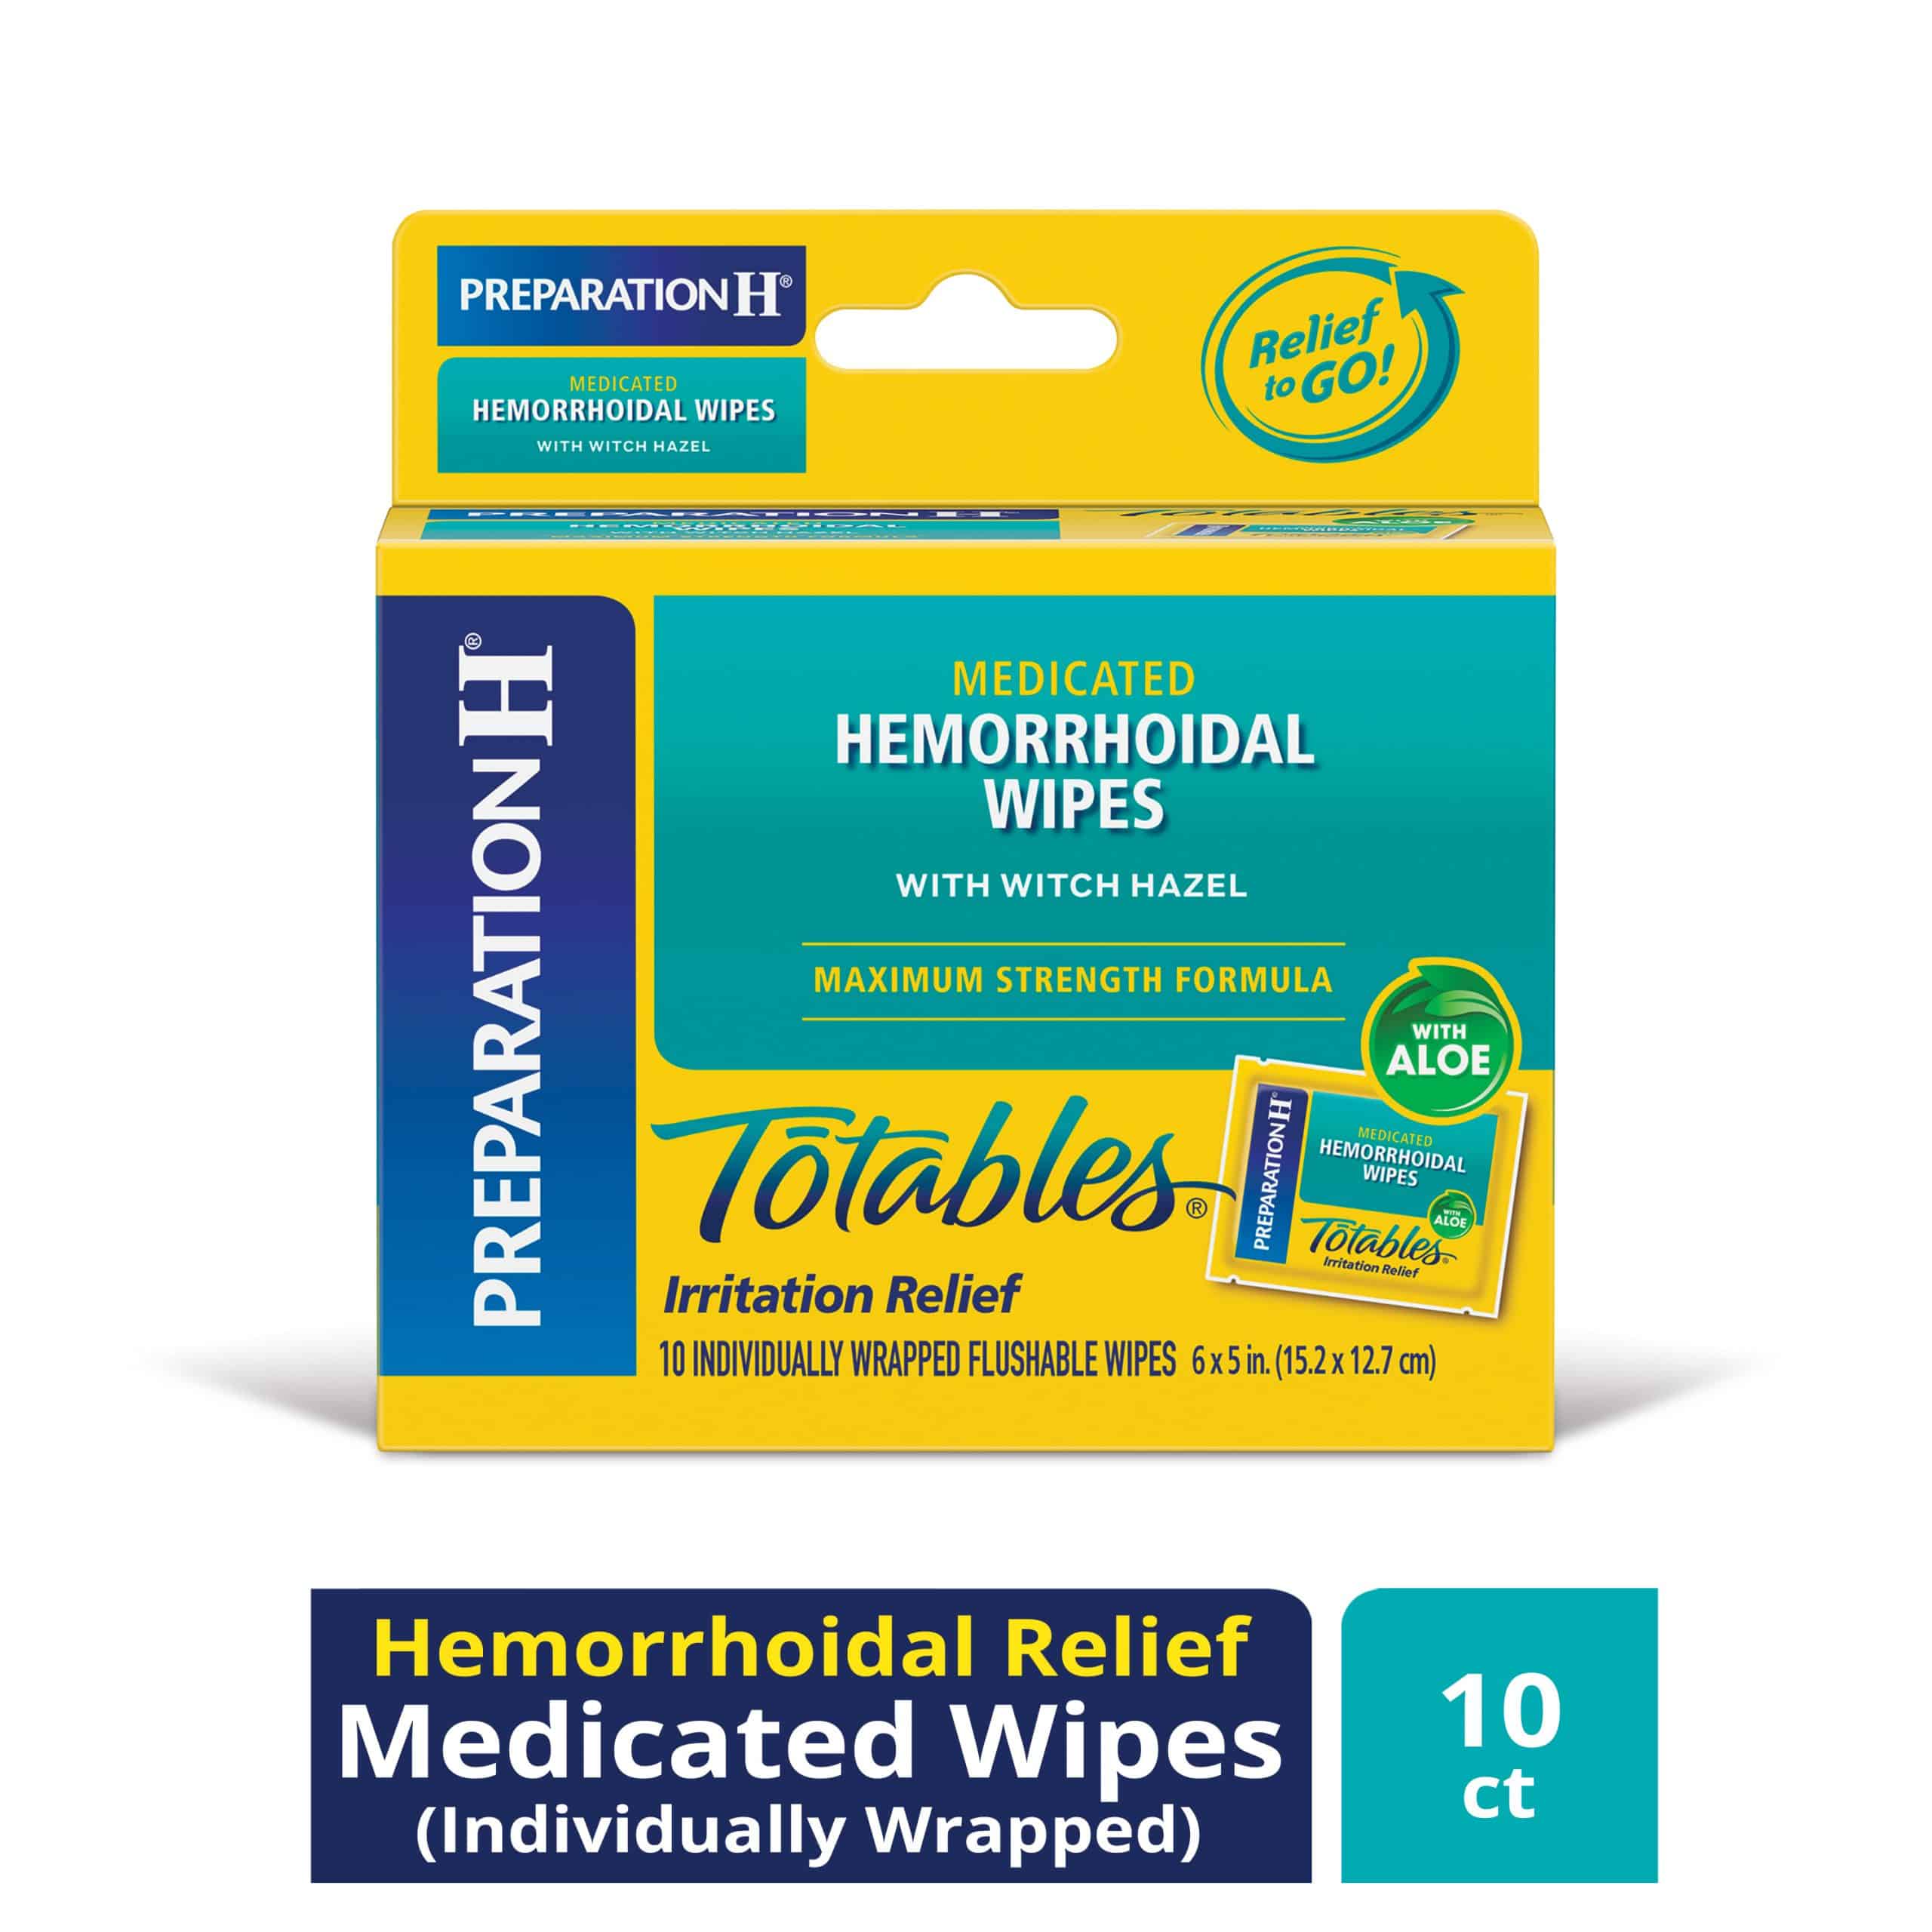 Preparation H Totables Medicated Hemorrhoid Wipes and flushable Wipes ...